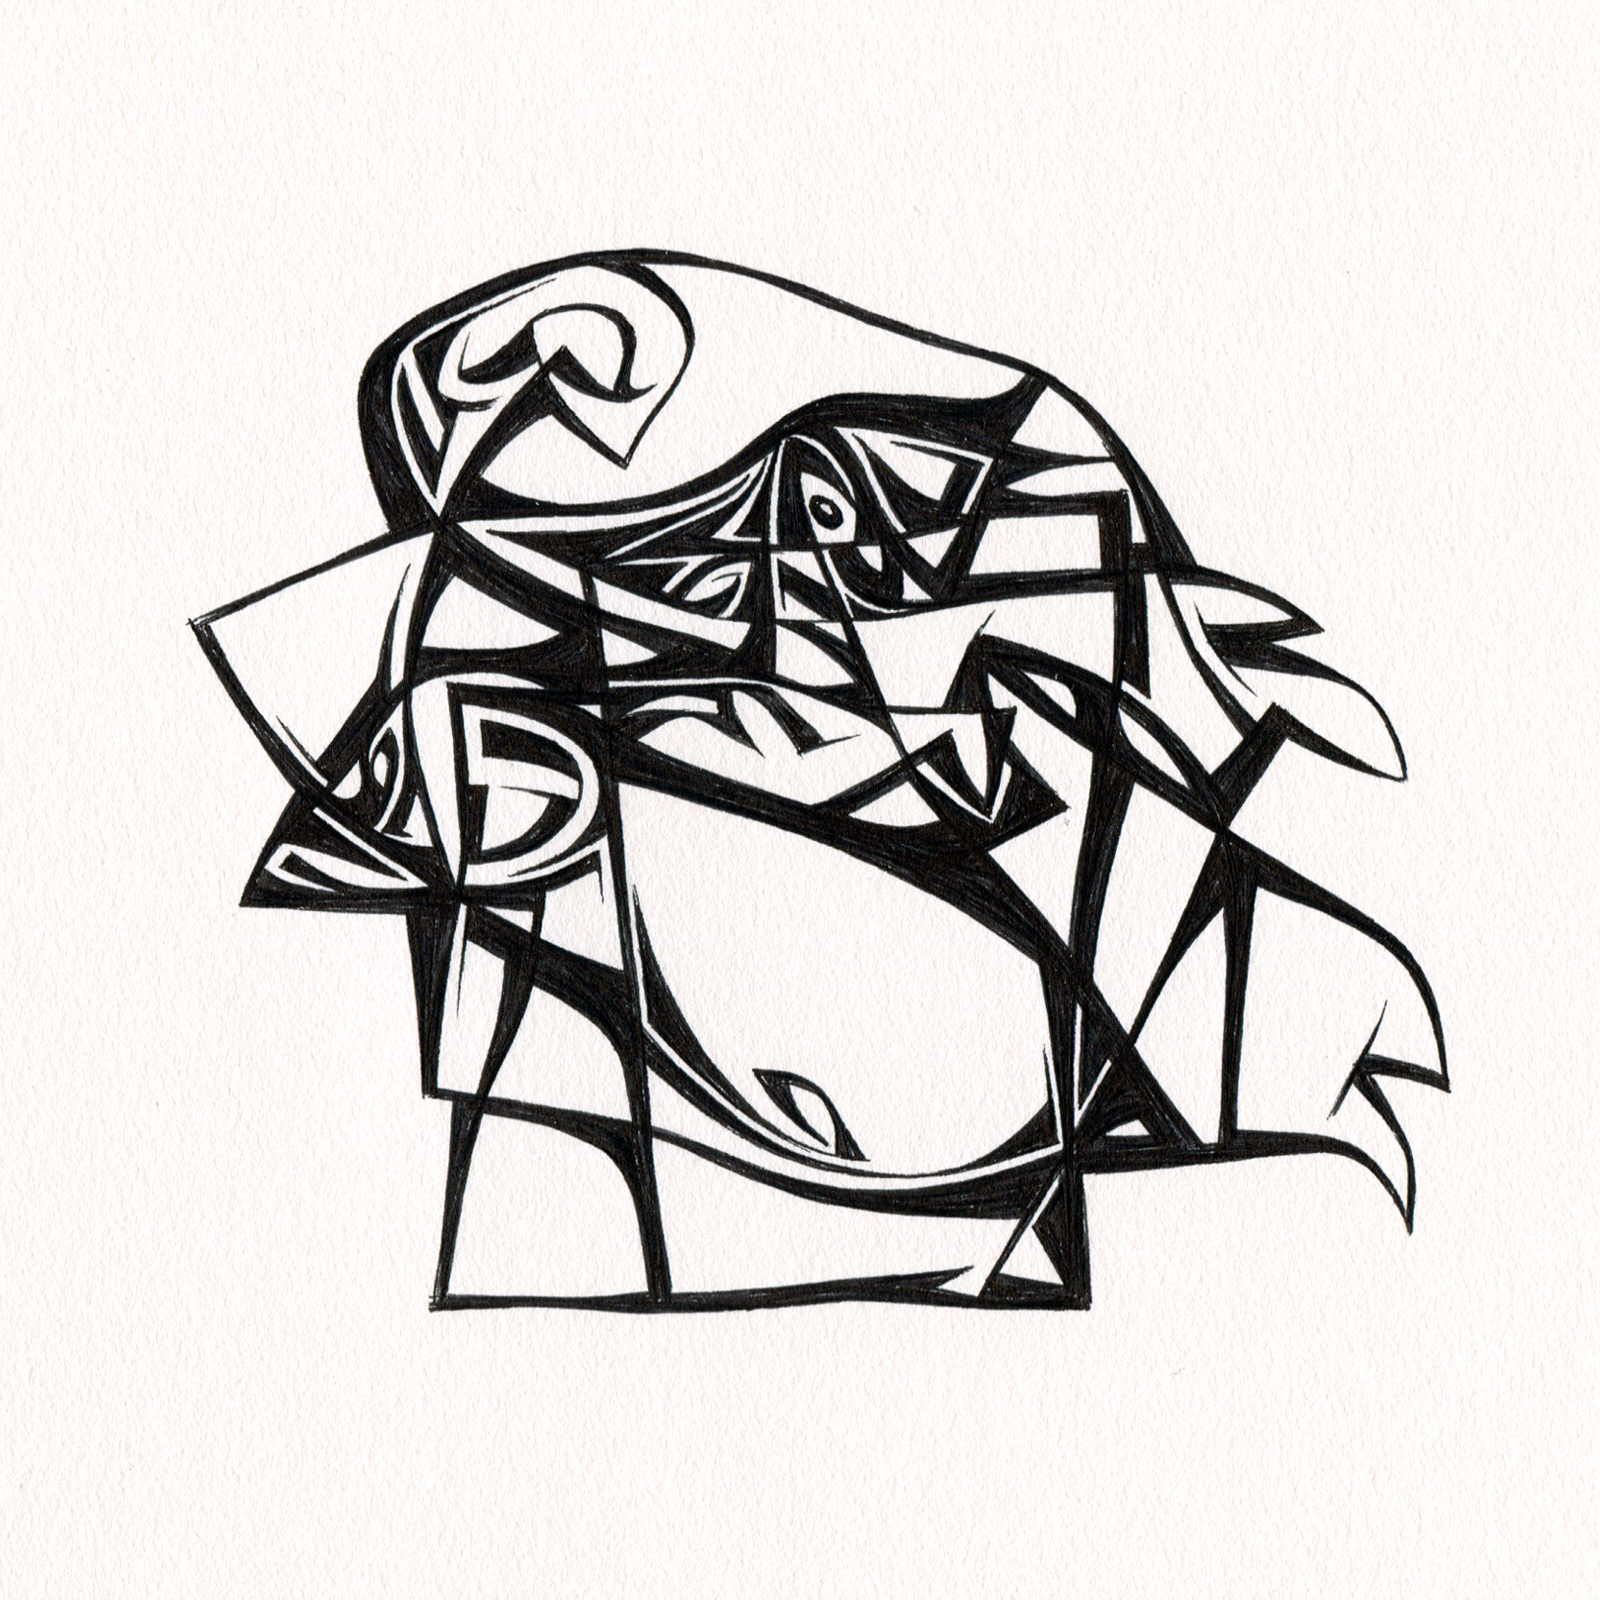   Untitled Ink Drawing #95 , 2015. Ink on paper. Approximately 5" x 5". 